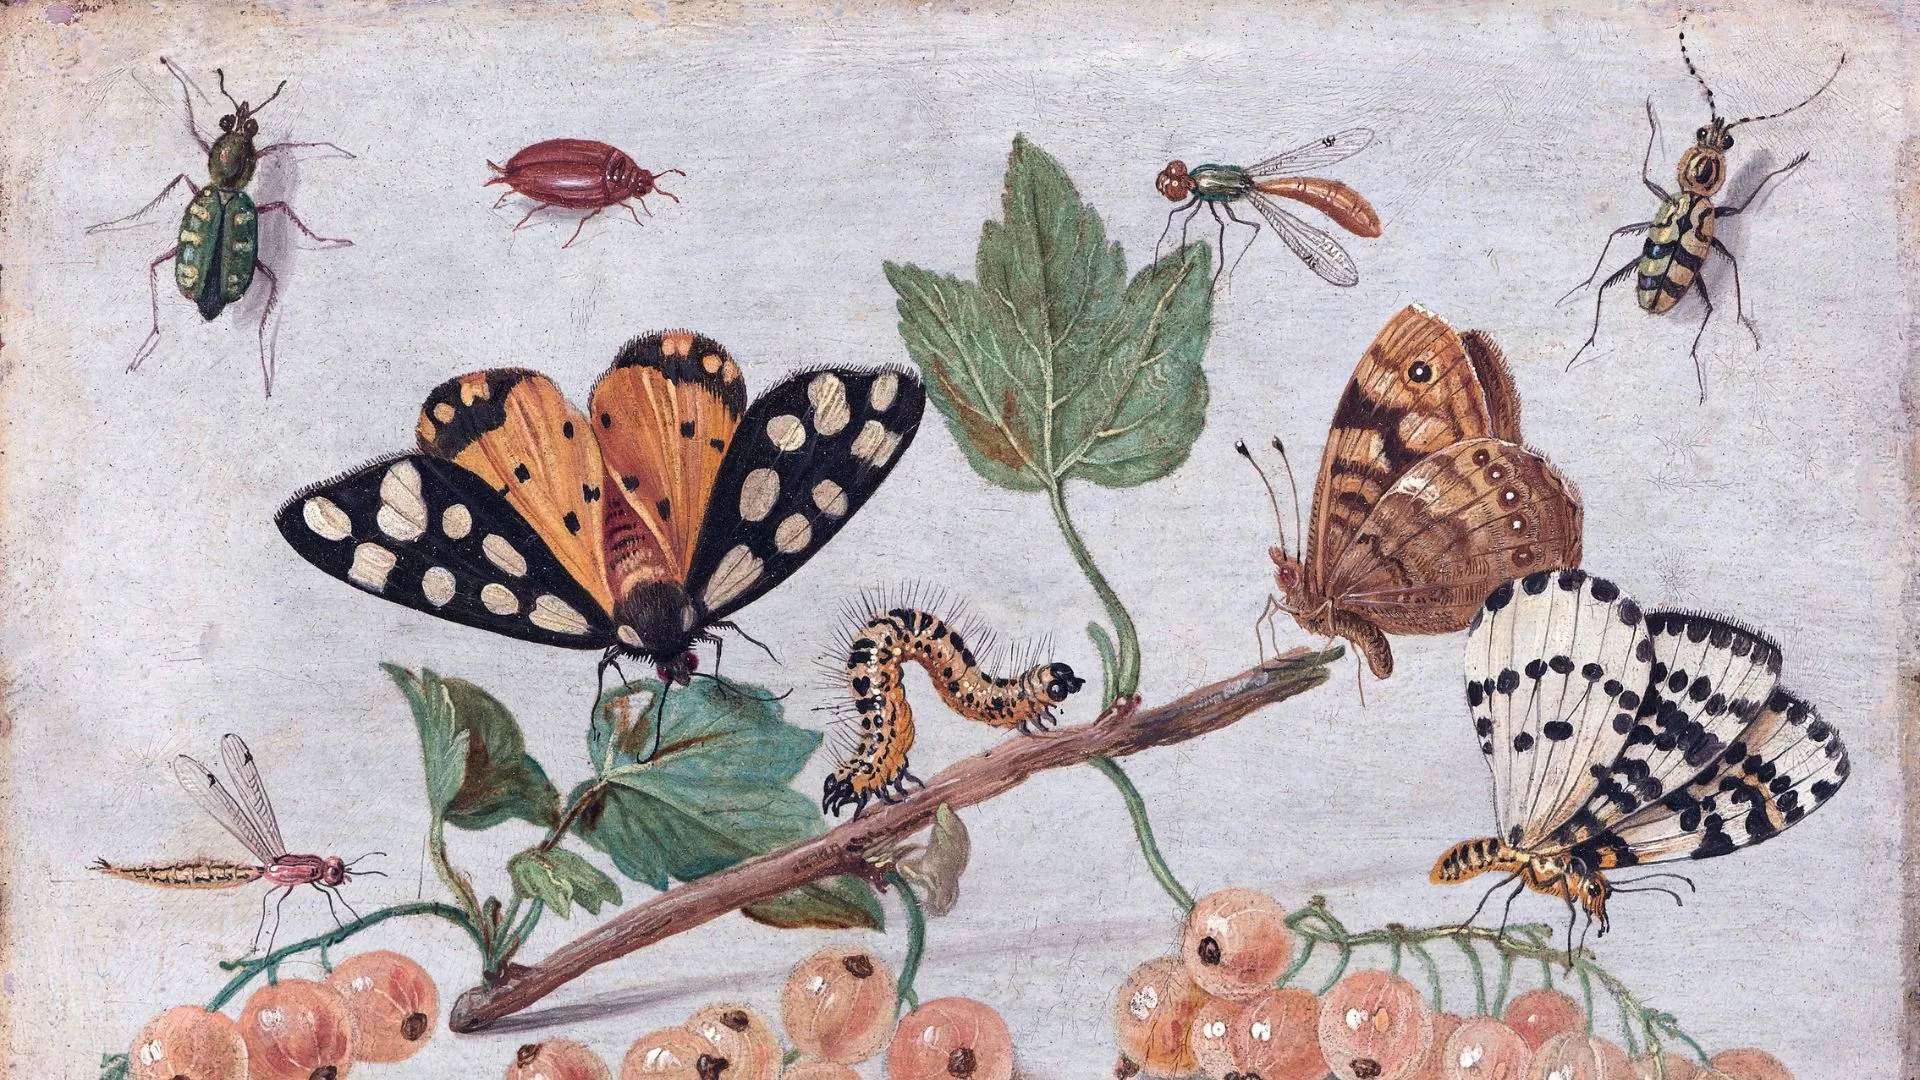 The Remarkable World of Insects